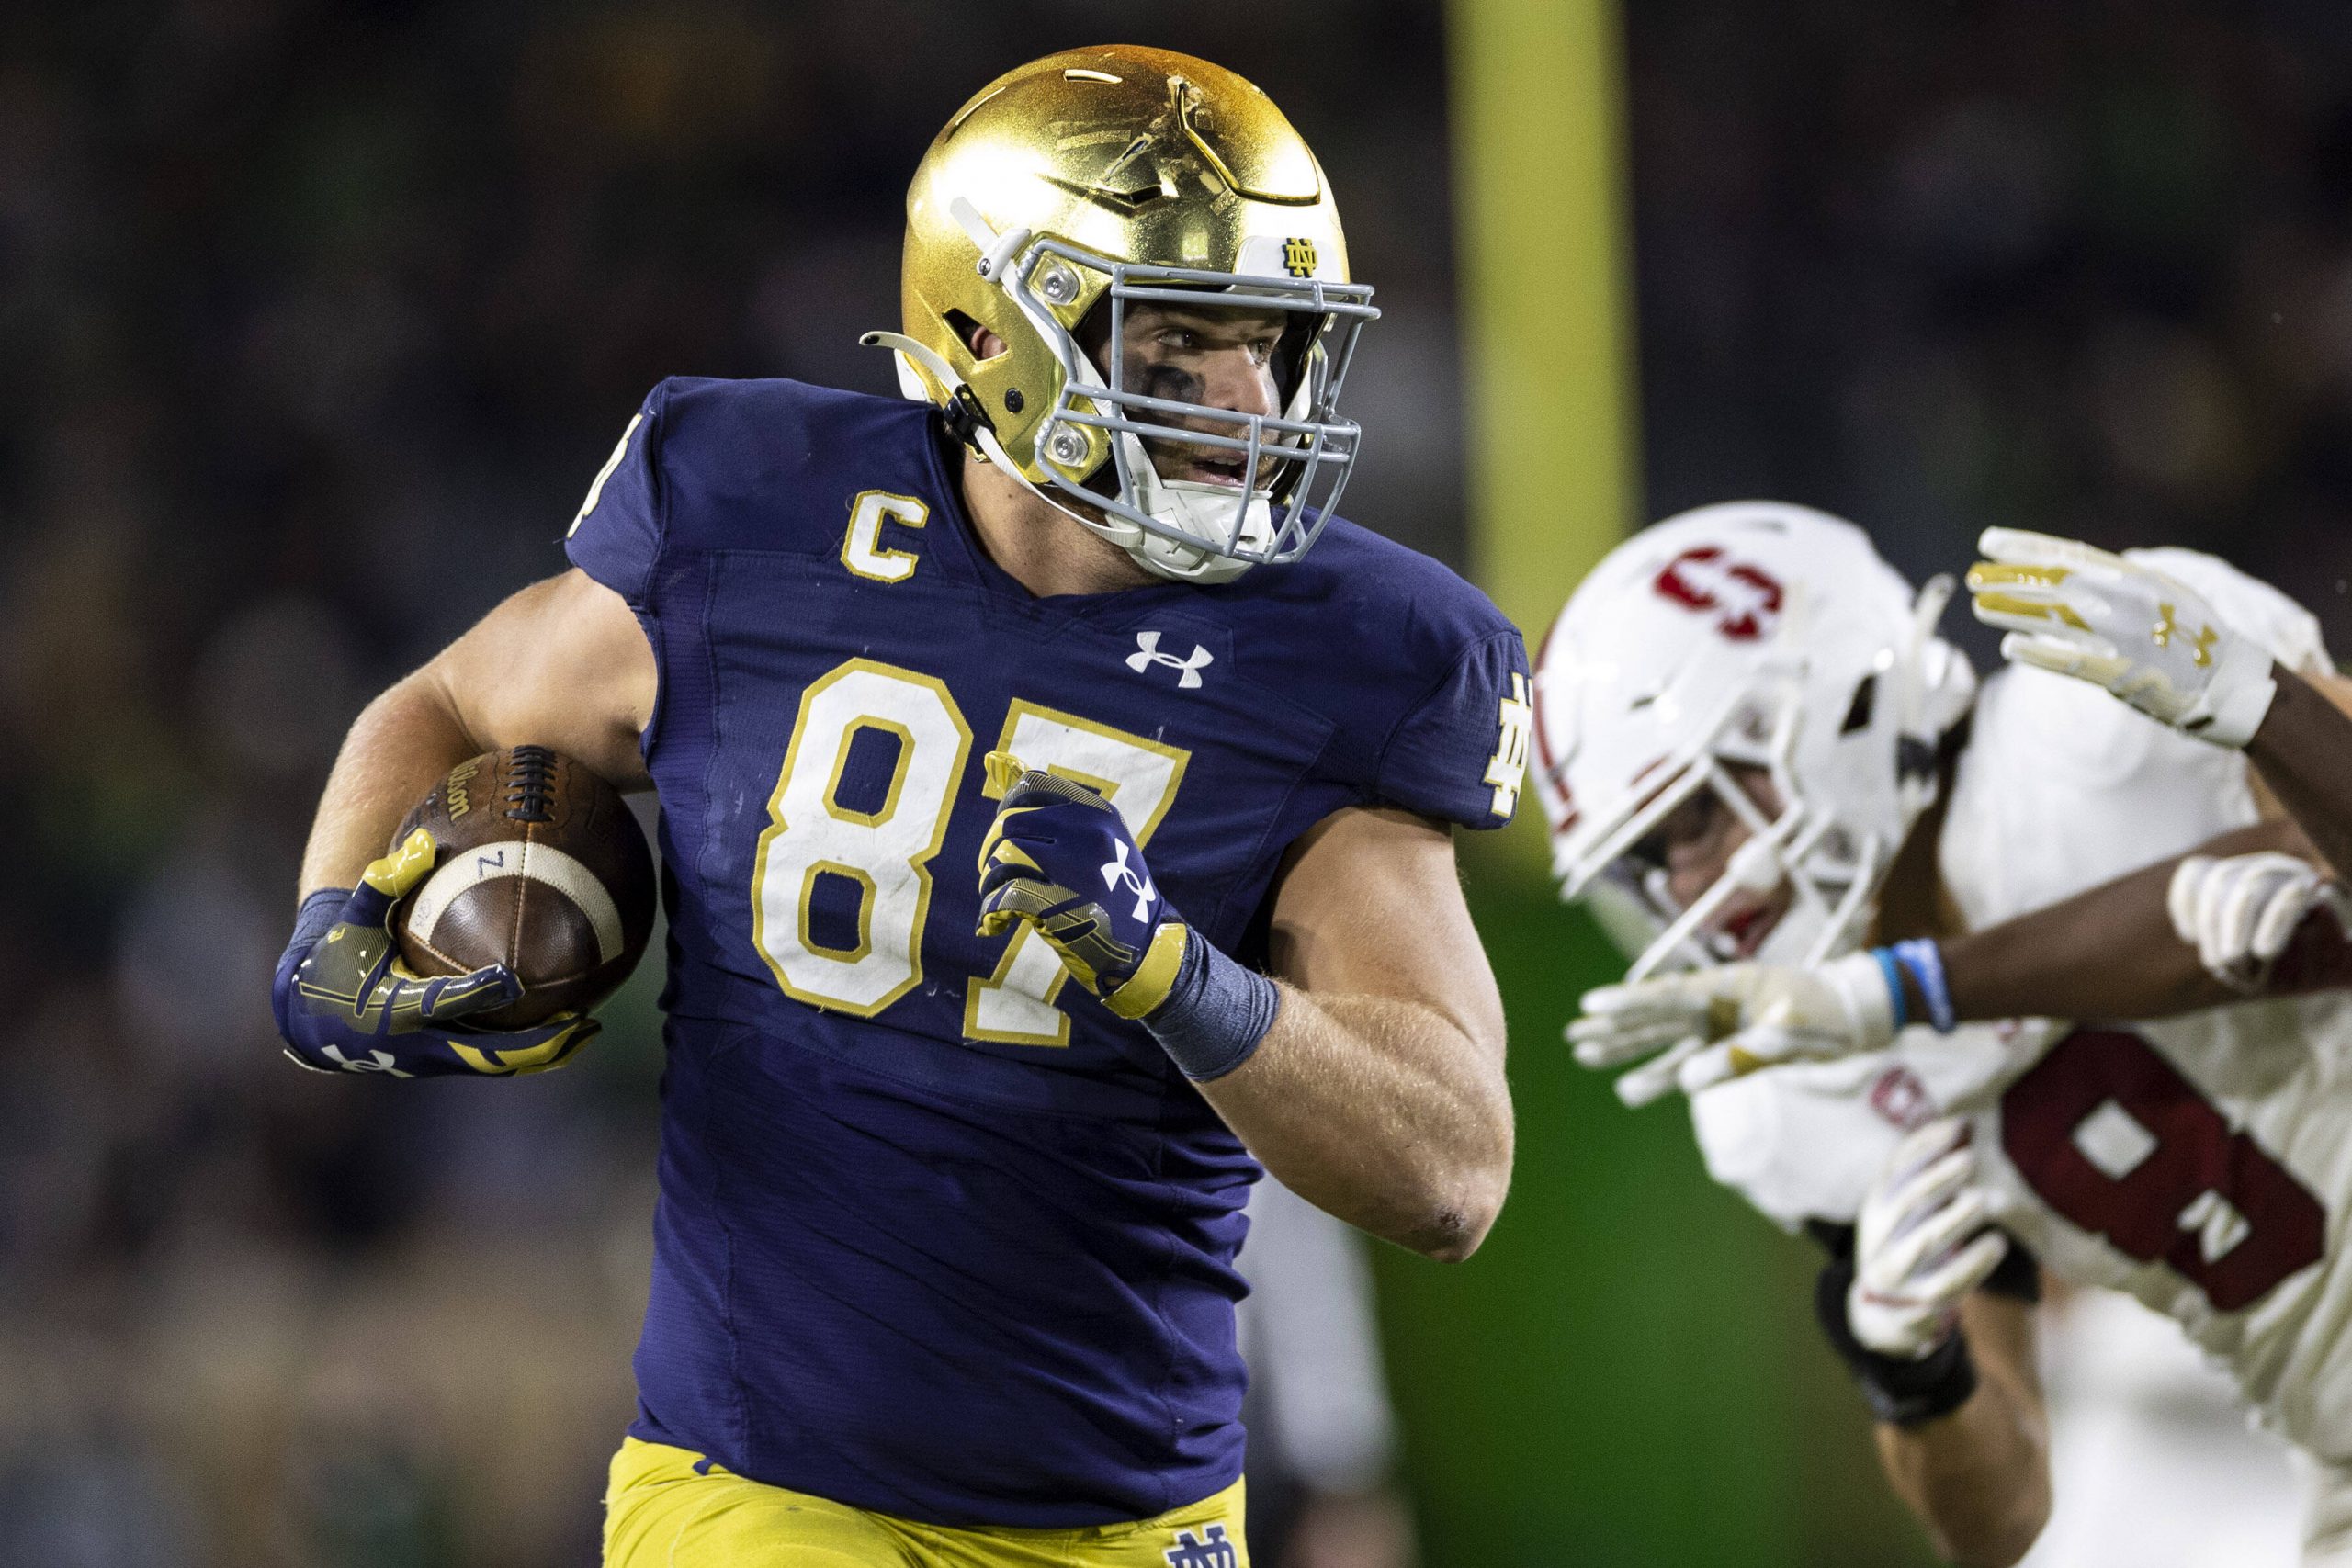 tight ends nfl draft - michael mayer ist unser top kandidat